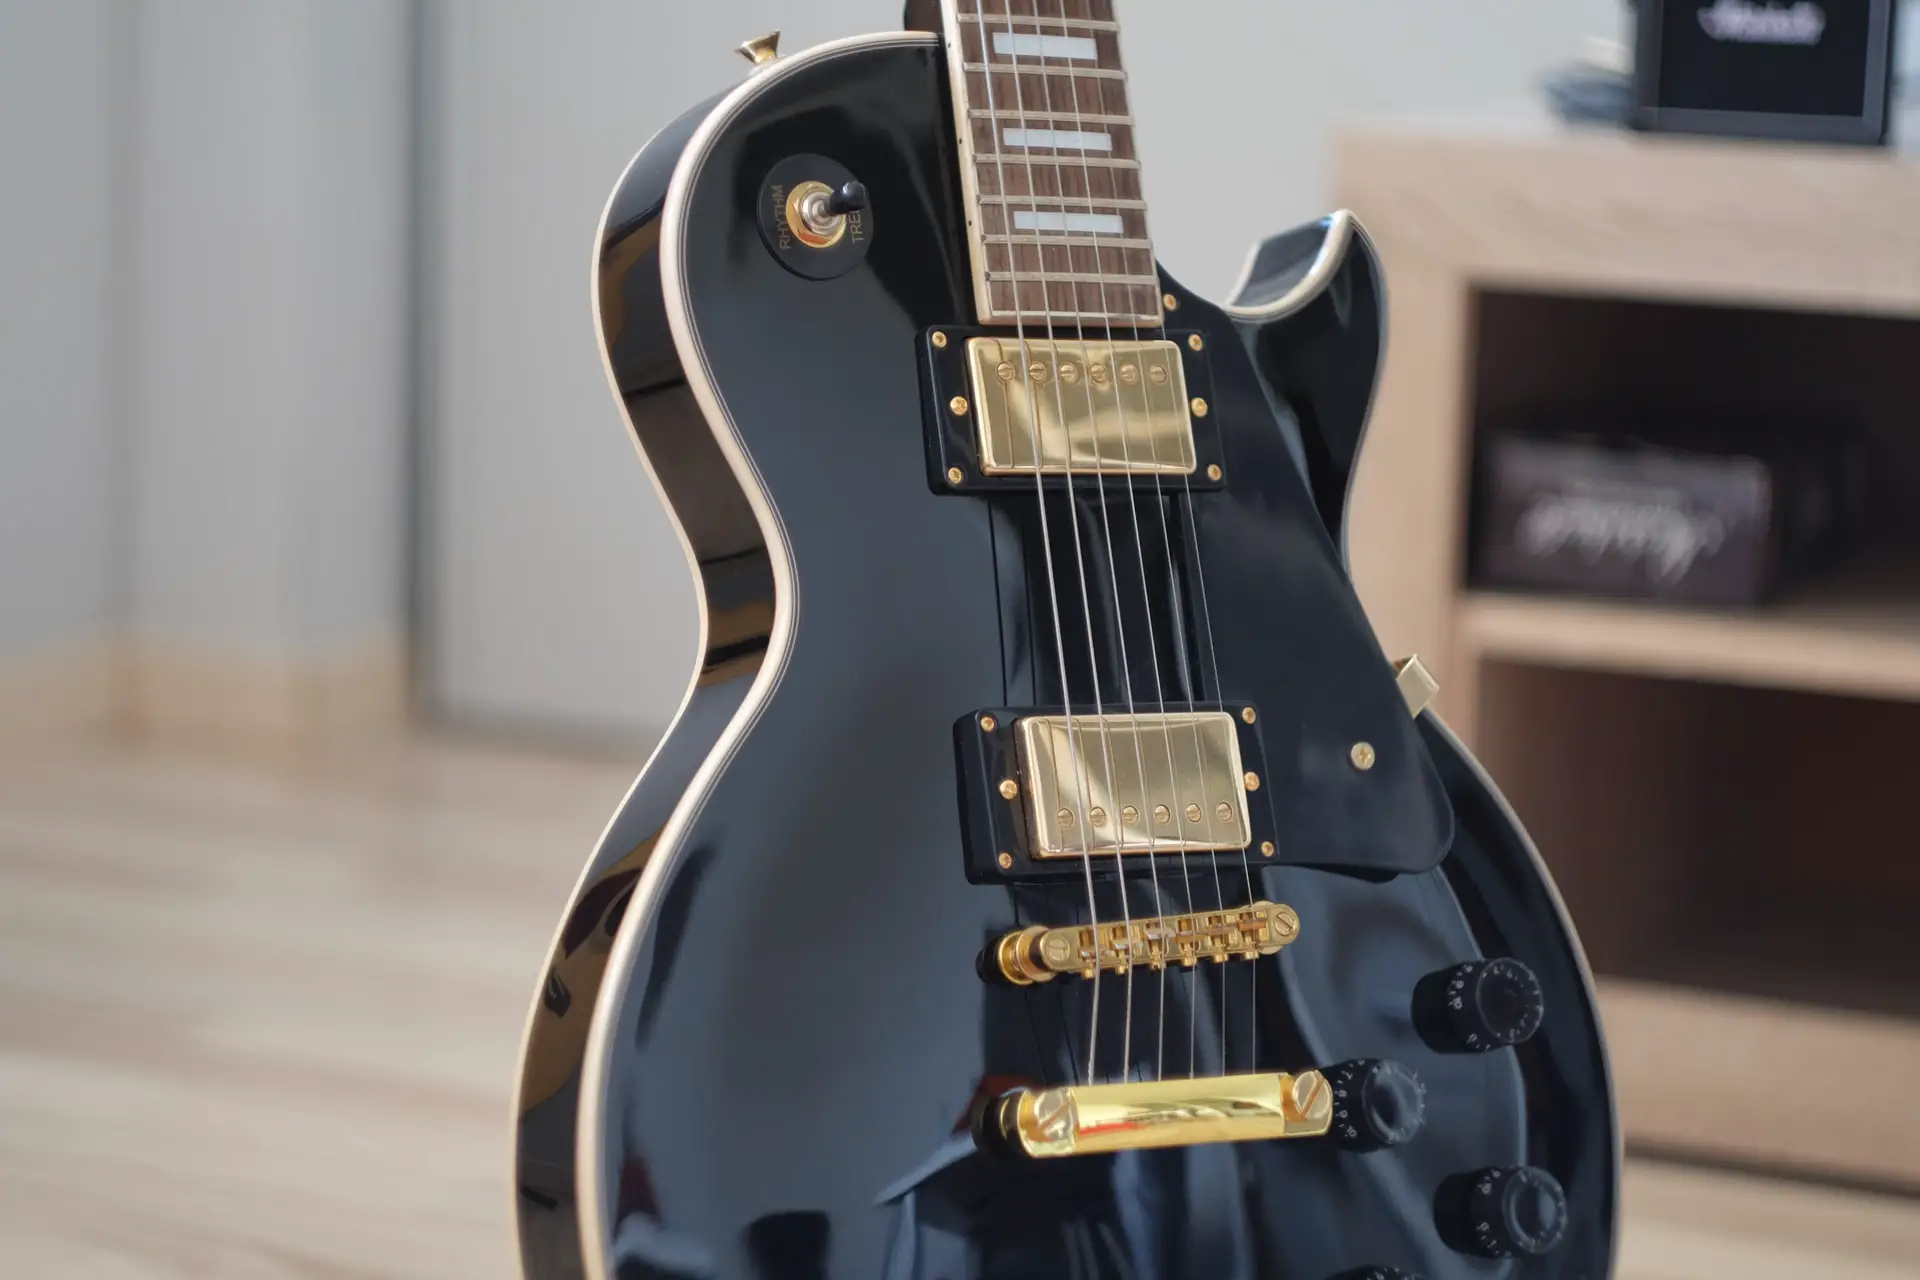 Veteran Review Of Gibson: Reliability, Value, Tone & Price